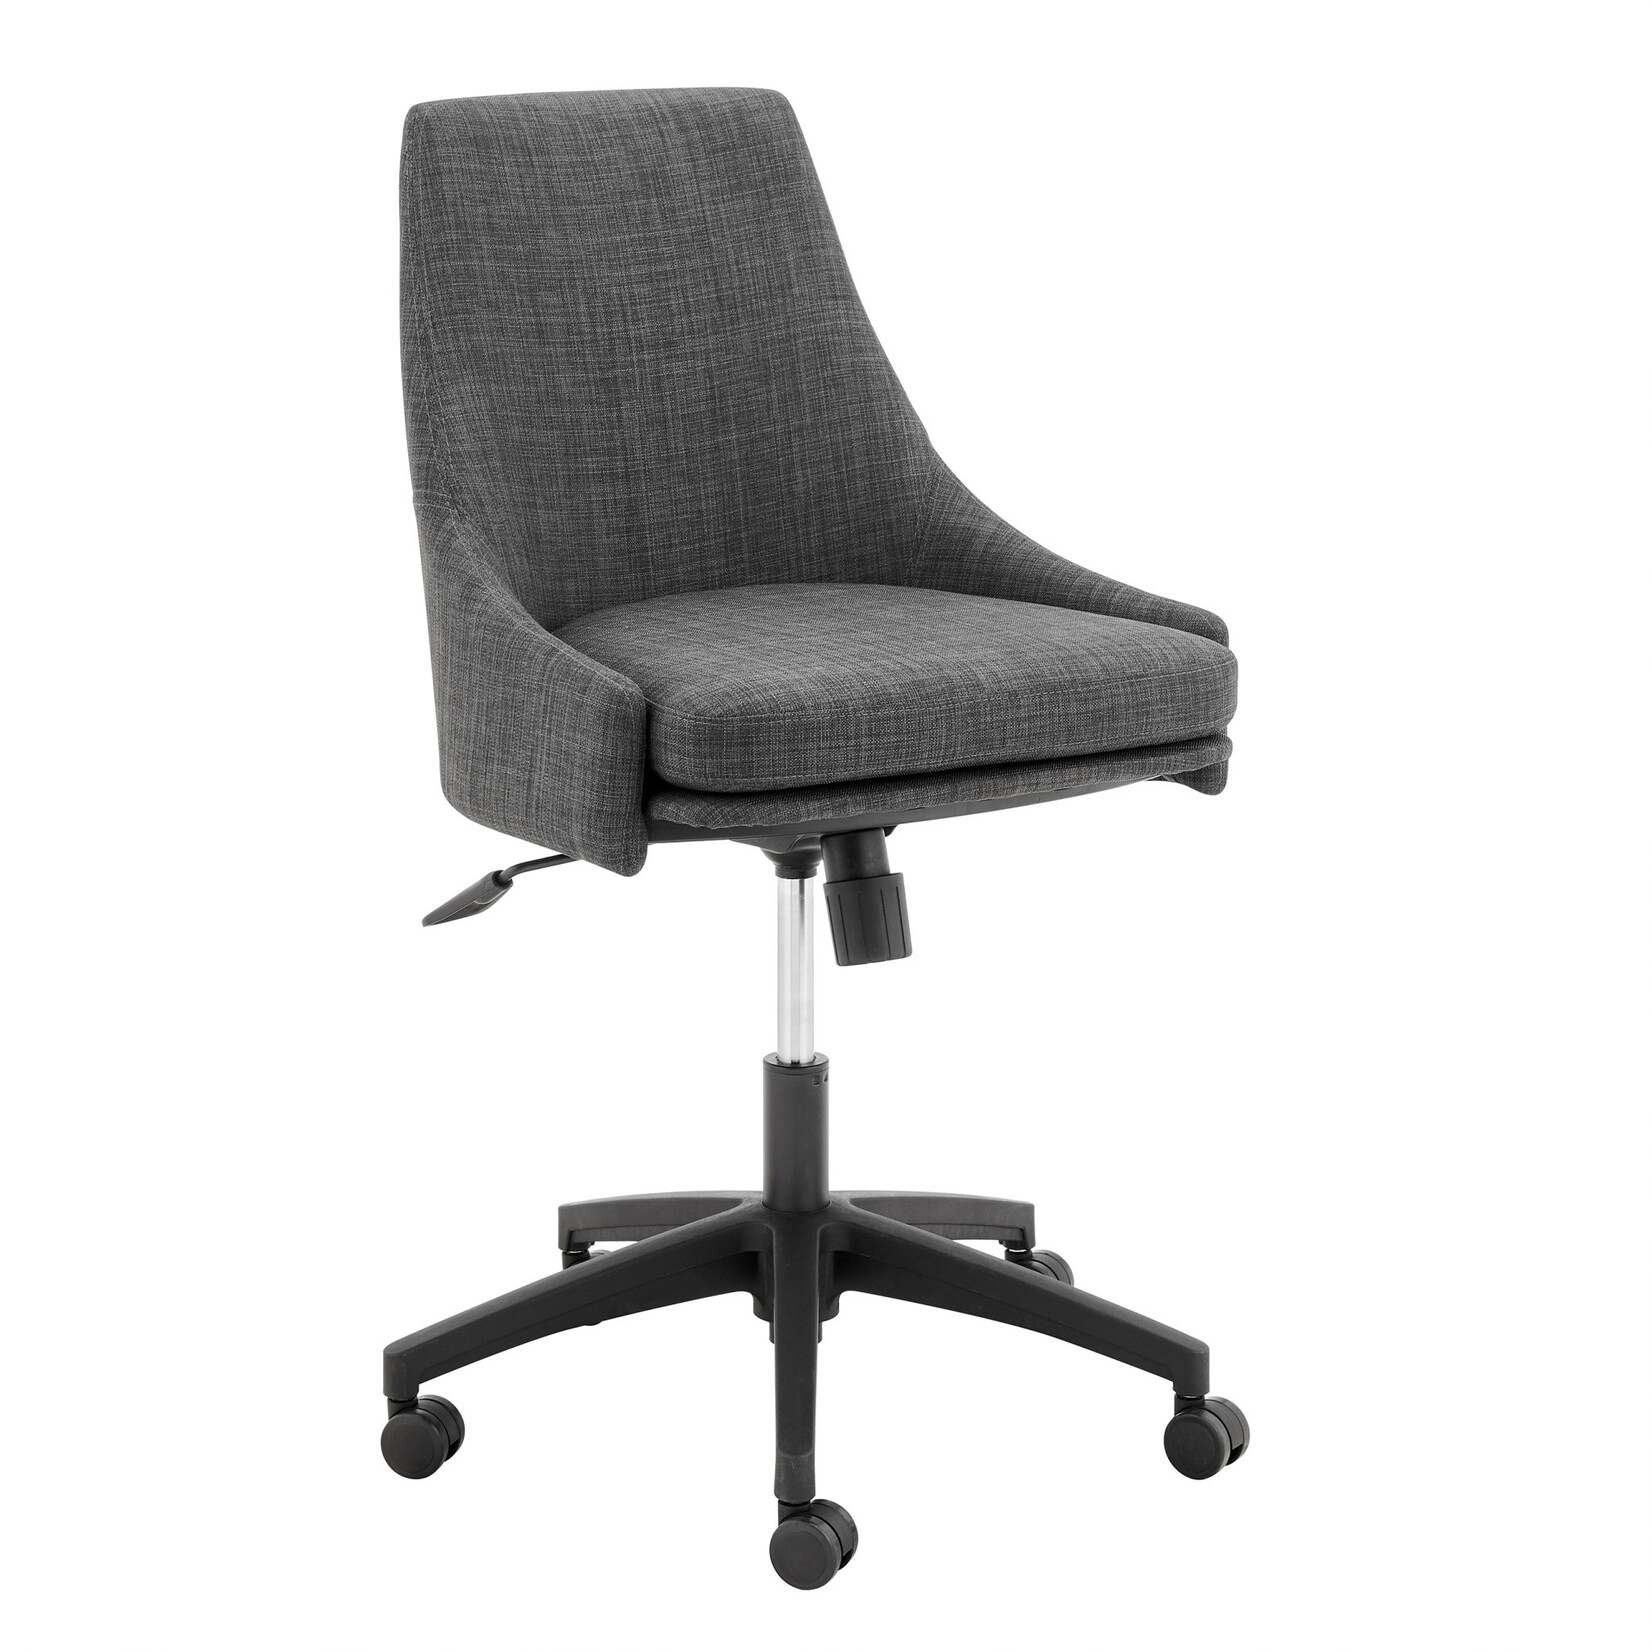 EuroStyle Signa Office Chair Charcoal